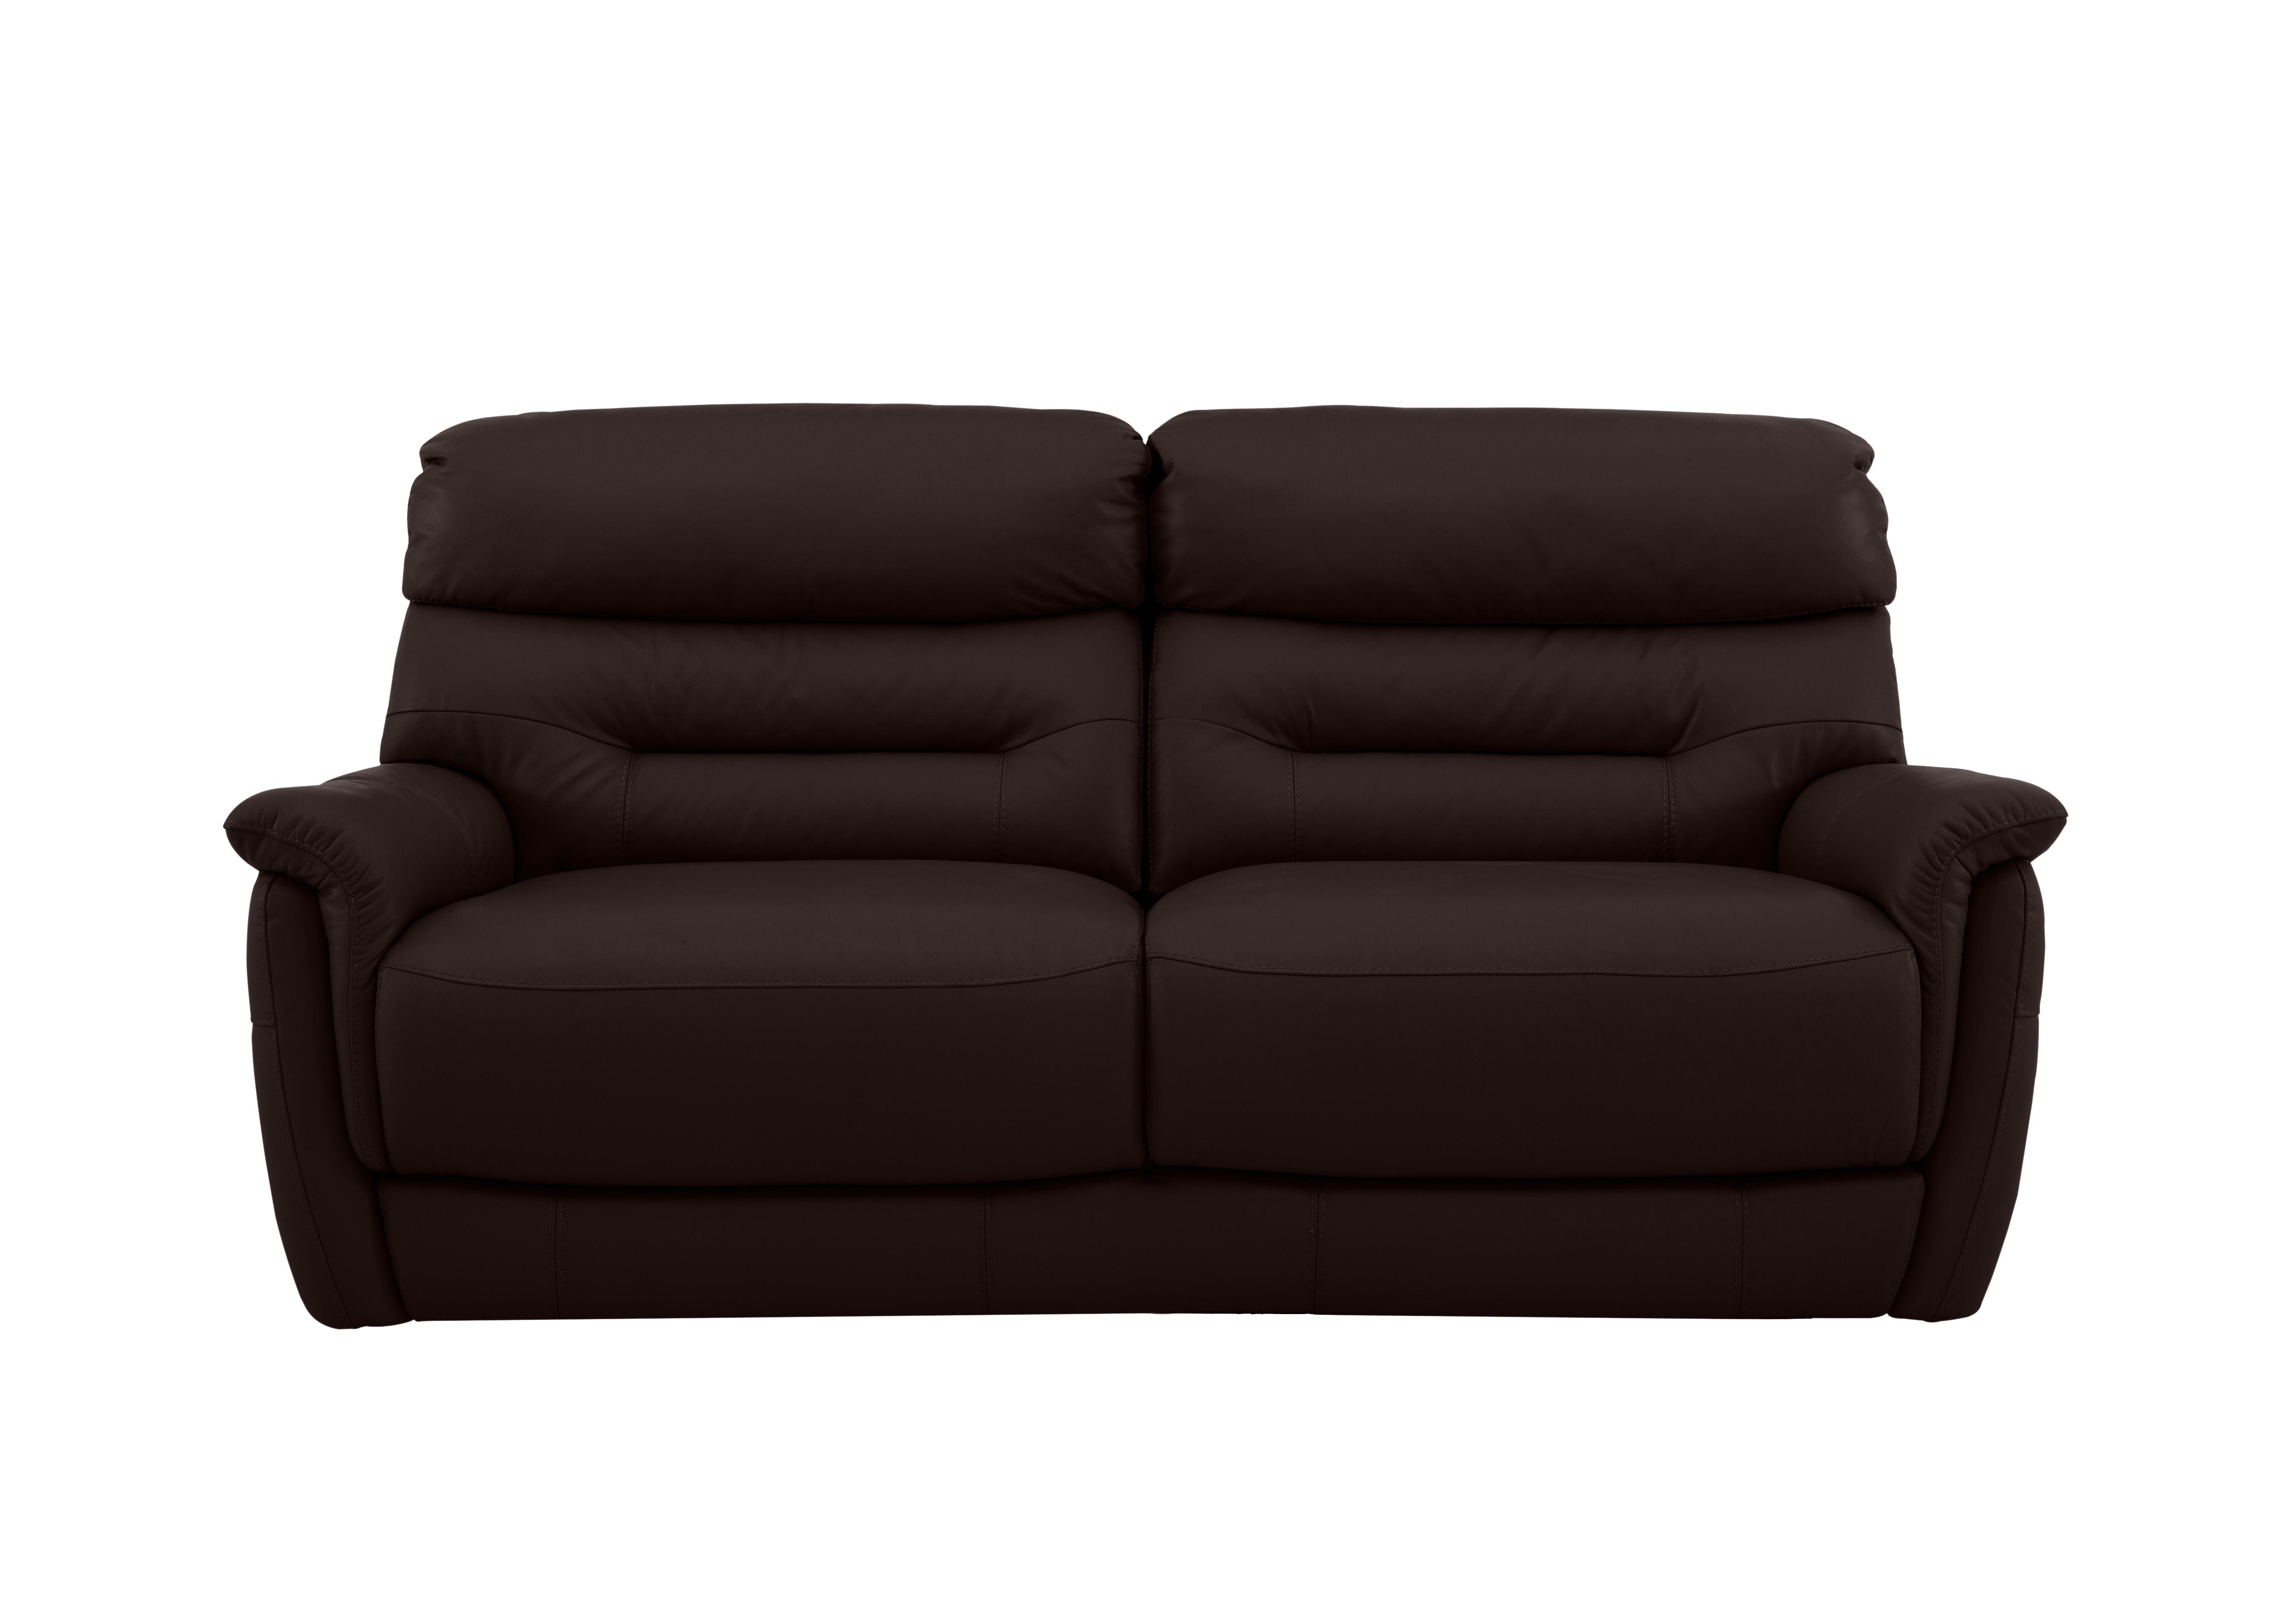 Chicago 3 Seater Leather Sofa in An-727b Dark Brown on Furniture Village